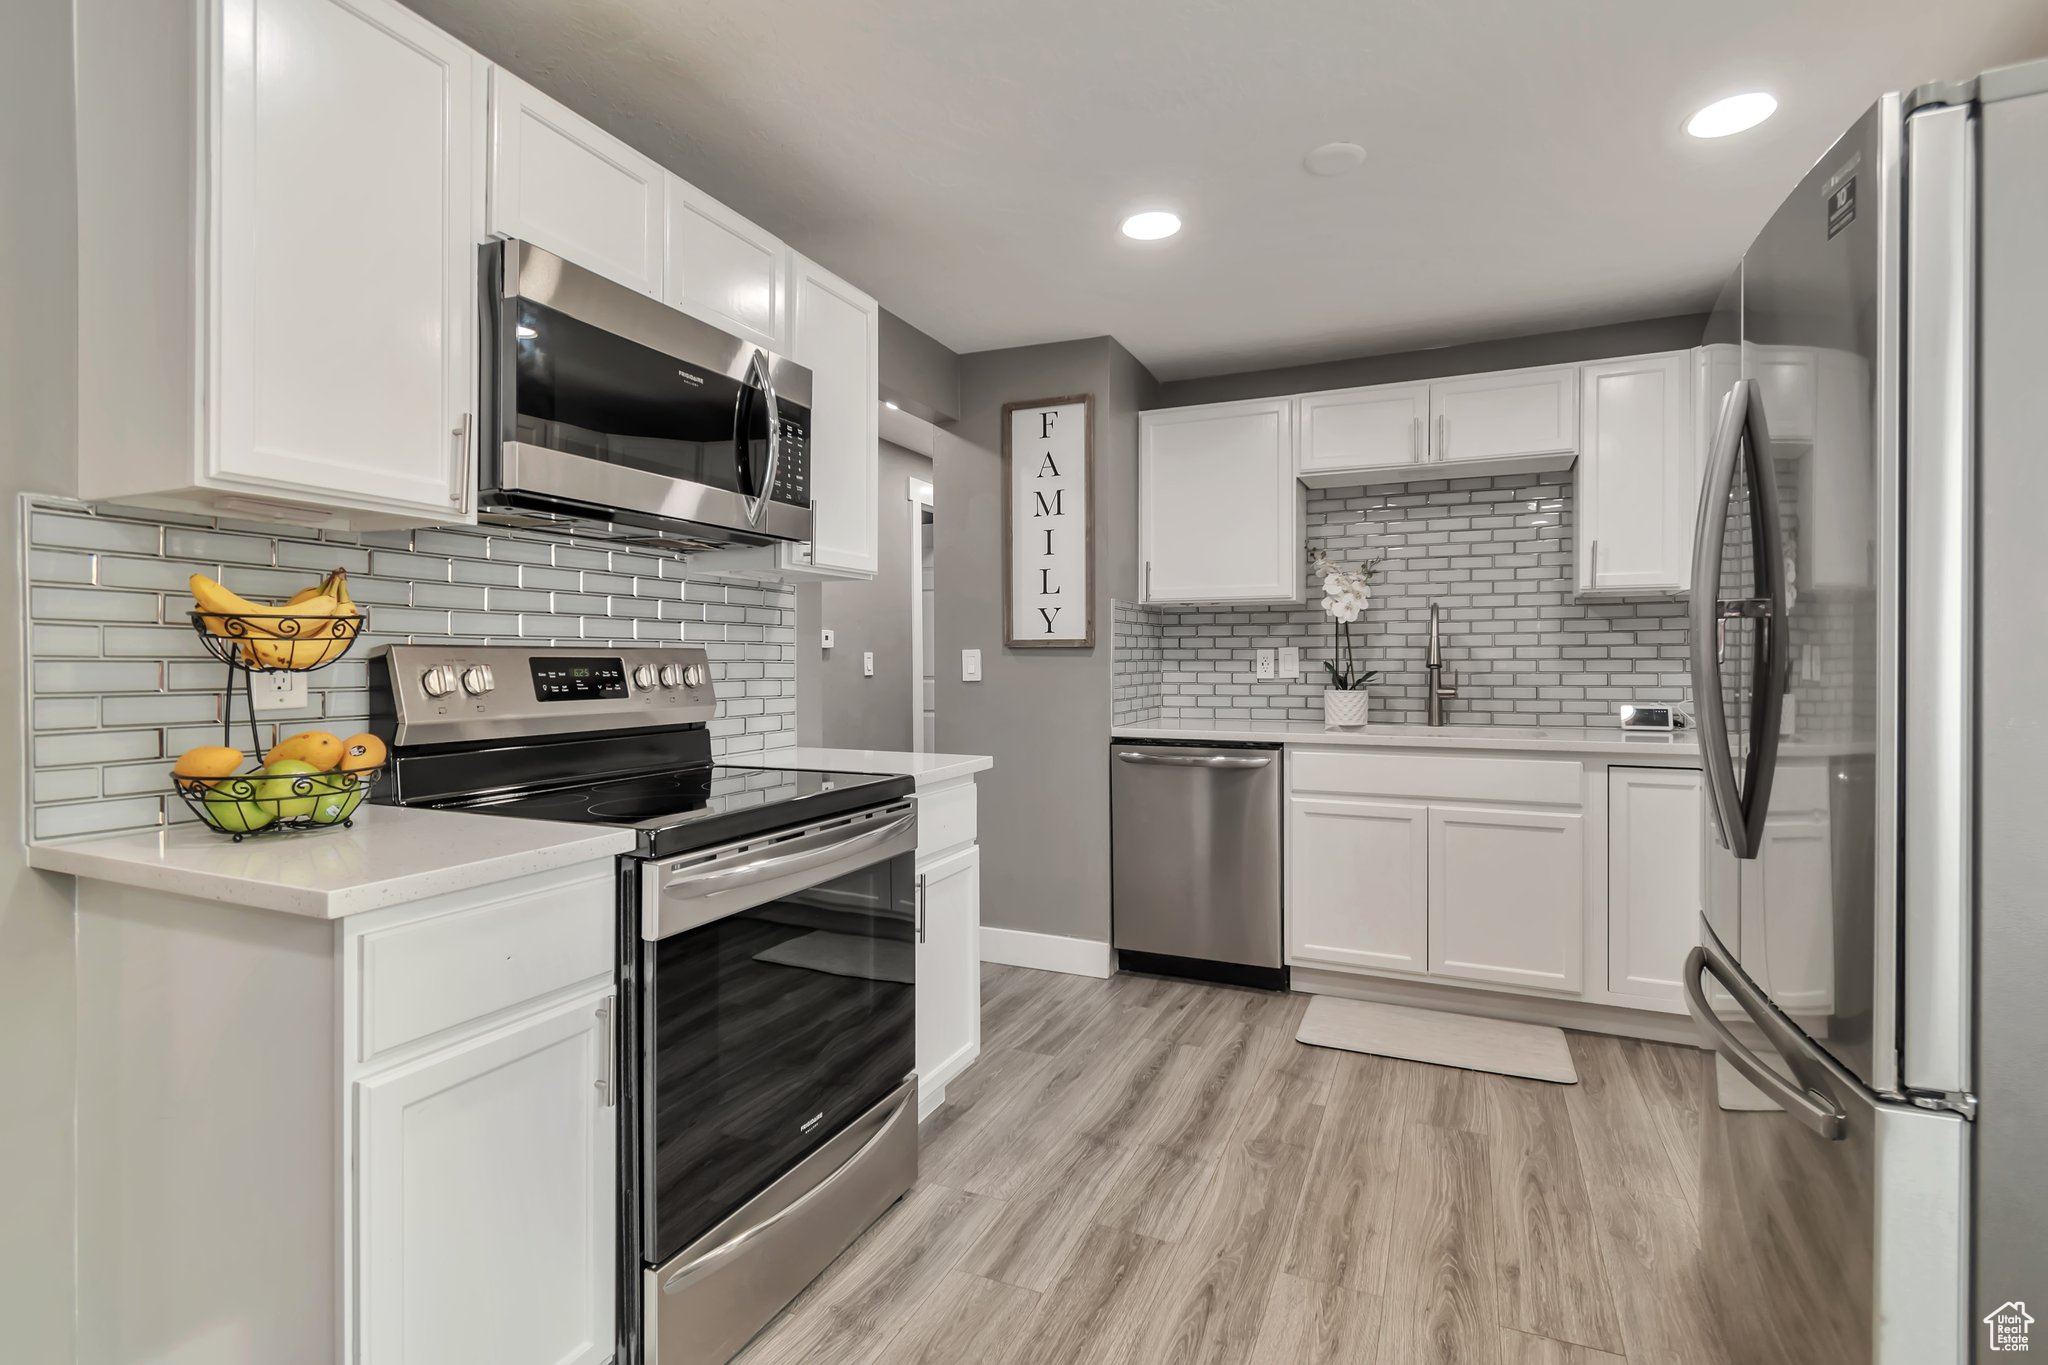 Kitchen featuring sink, backsplash, light wood-type flooring, white cabinetry, and stainless steel appliances